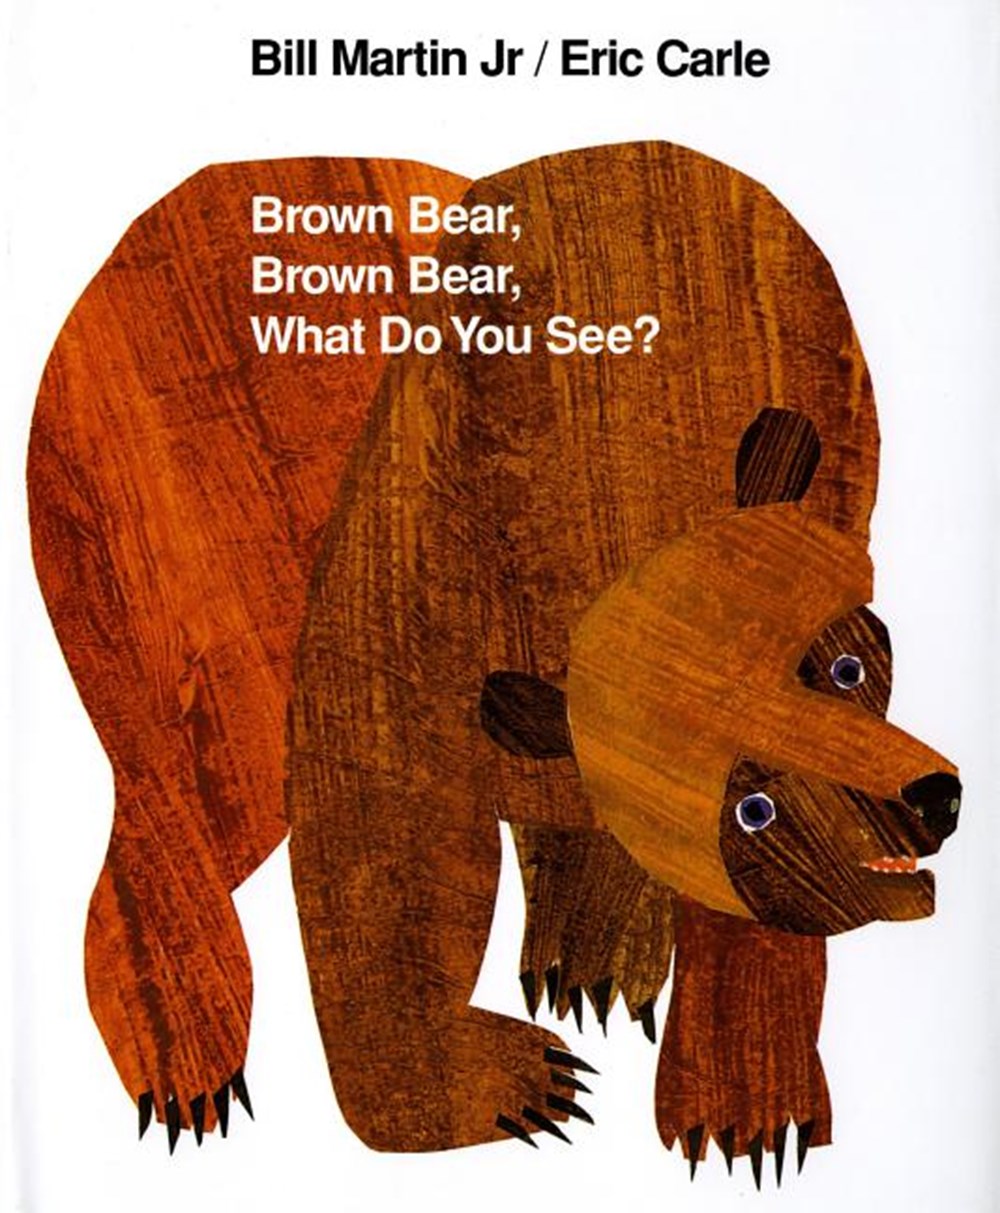 Brown Bear, Brown Bear, What Do You See?: 25th Anniversary Edition (Anniversary)